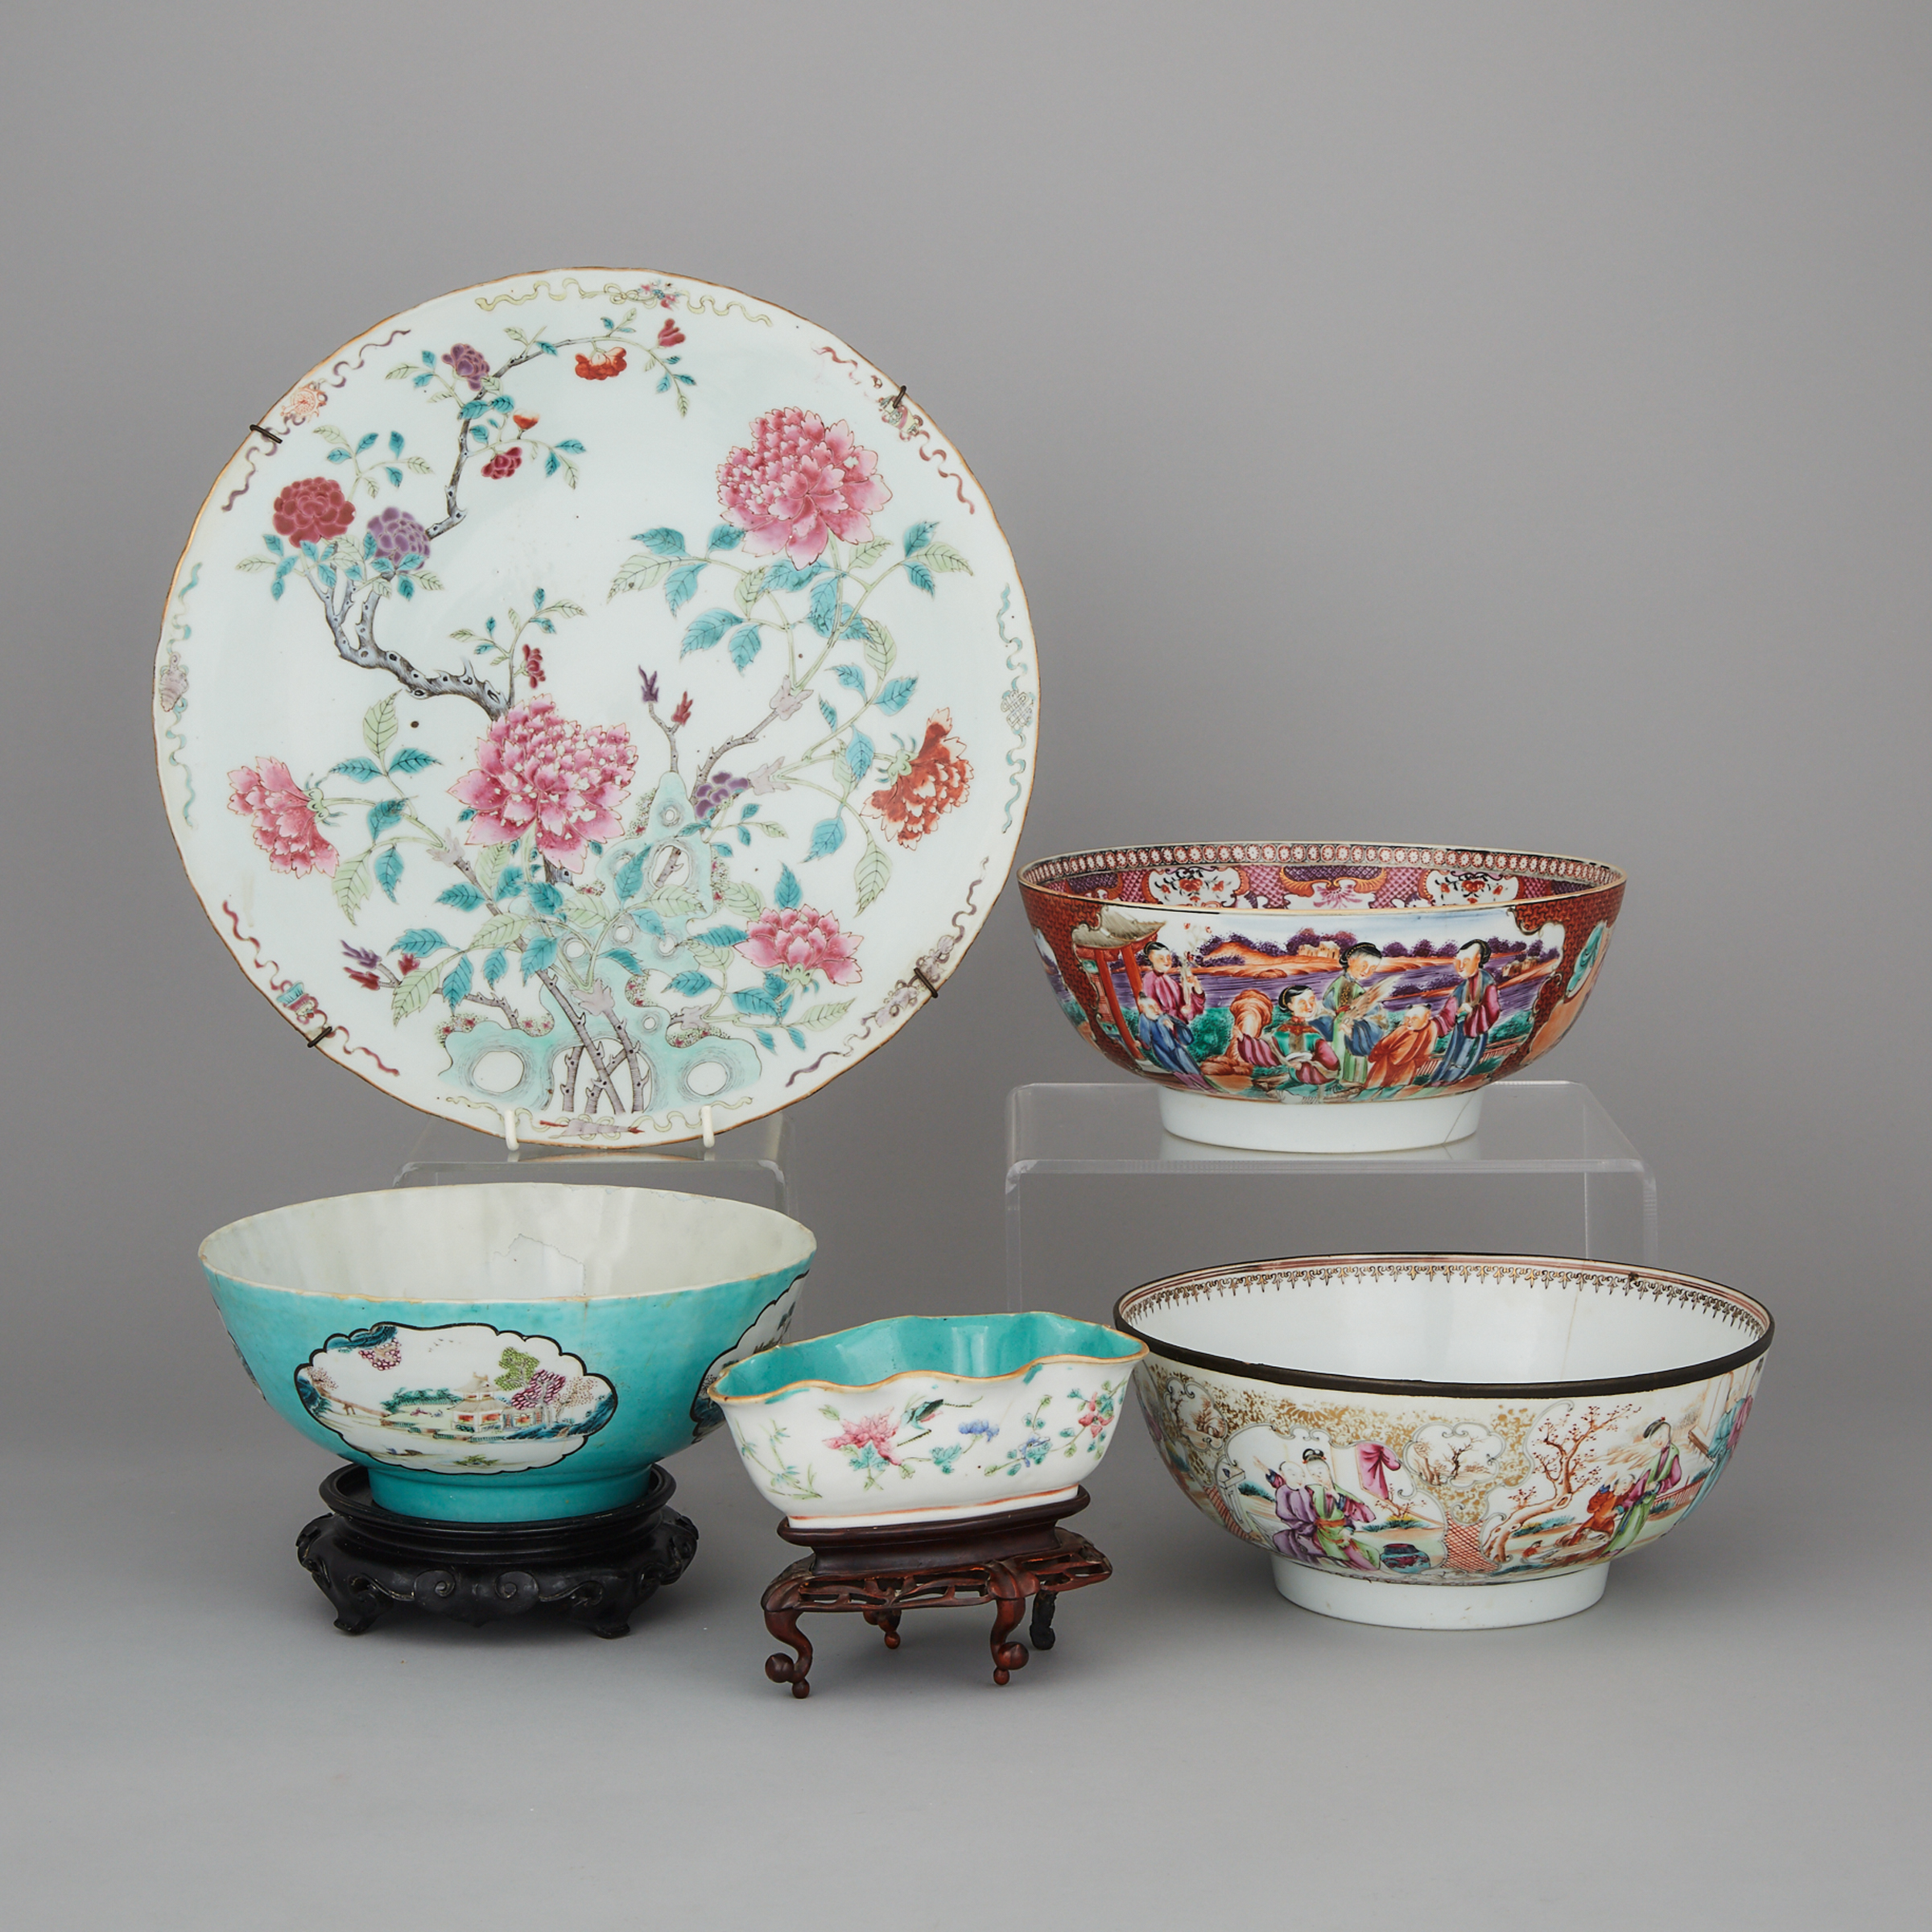 A Group of Five Famille Rose Export Wares, 18th  Century and Later